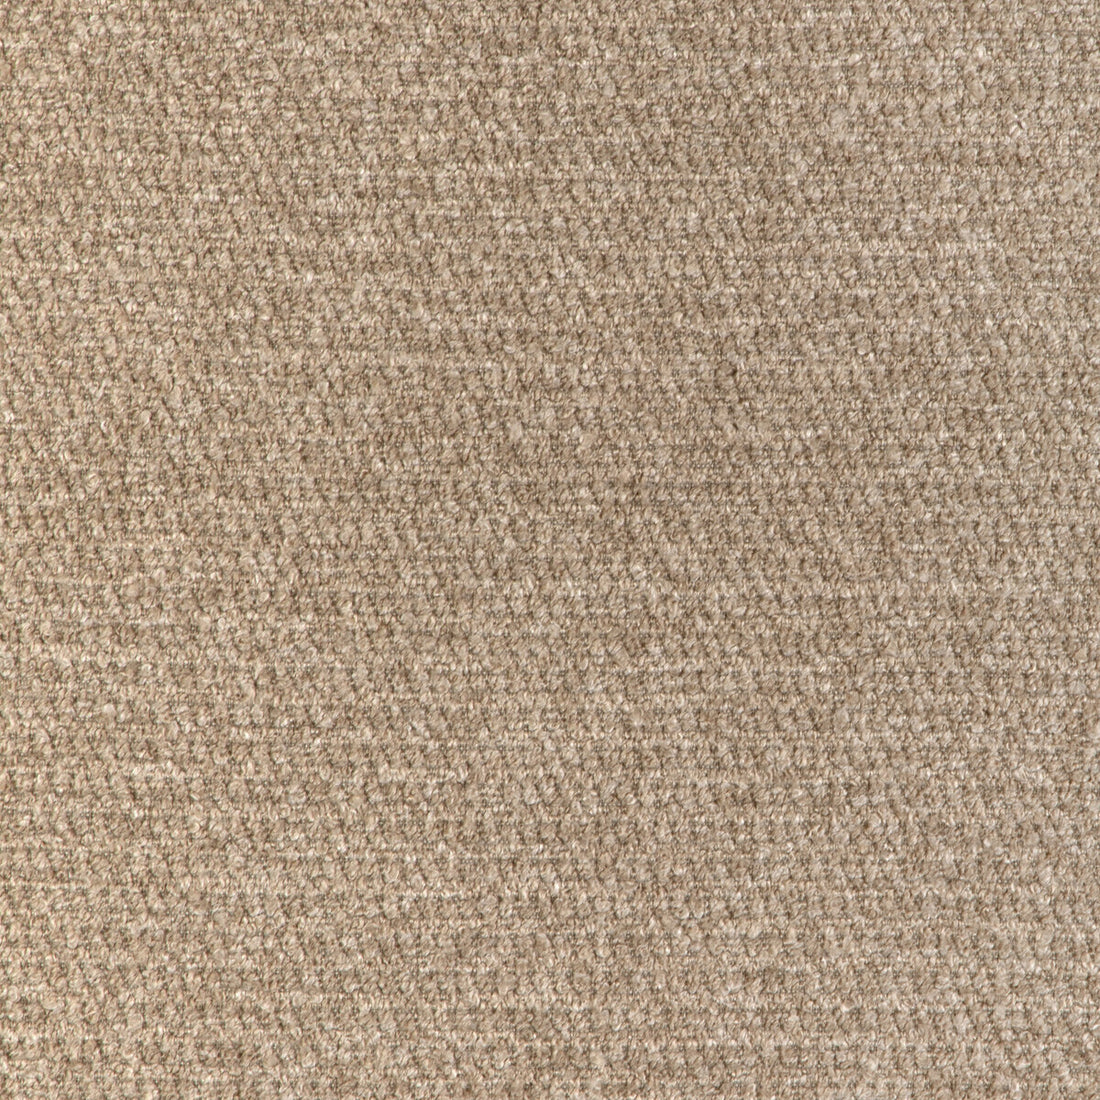 Kravet Design fabric in 36949-106 color - pattern 36946.106.0 - by Kravet Design in the Sustainable Textures II collection